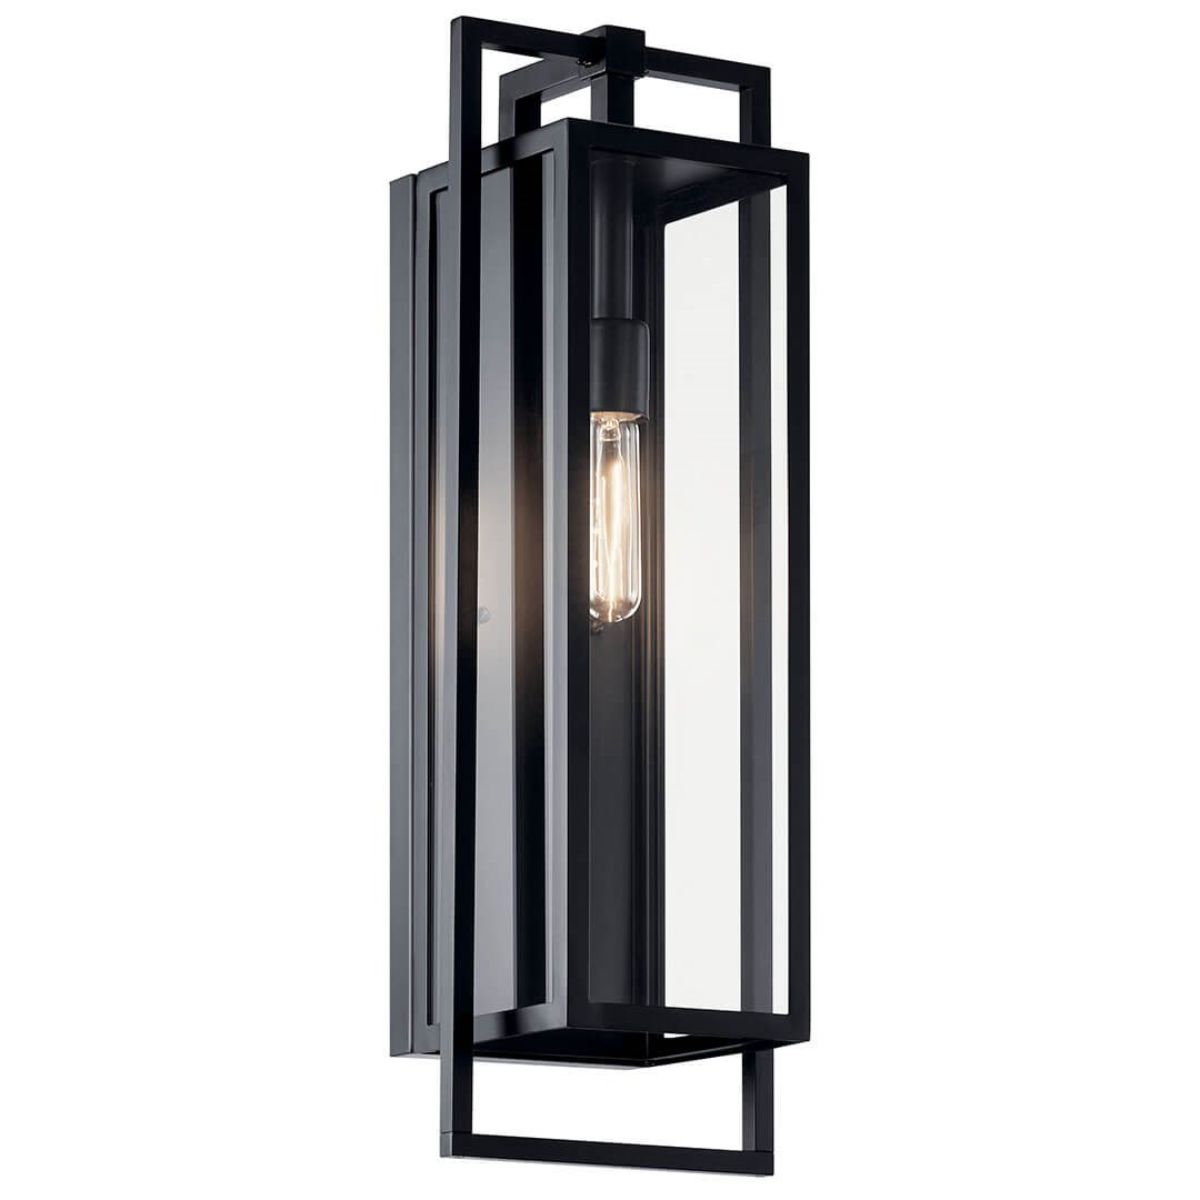 Goson 24 in. Outdoor Wall Sconce Black Finish